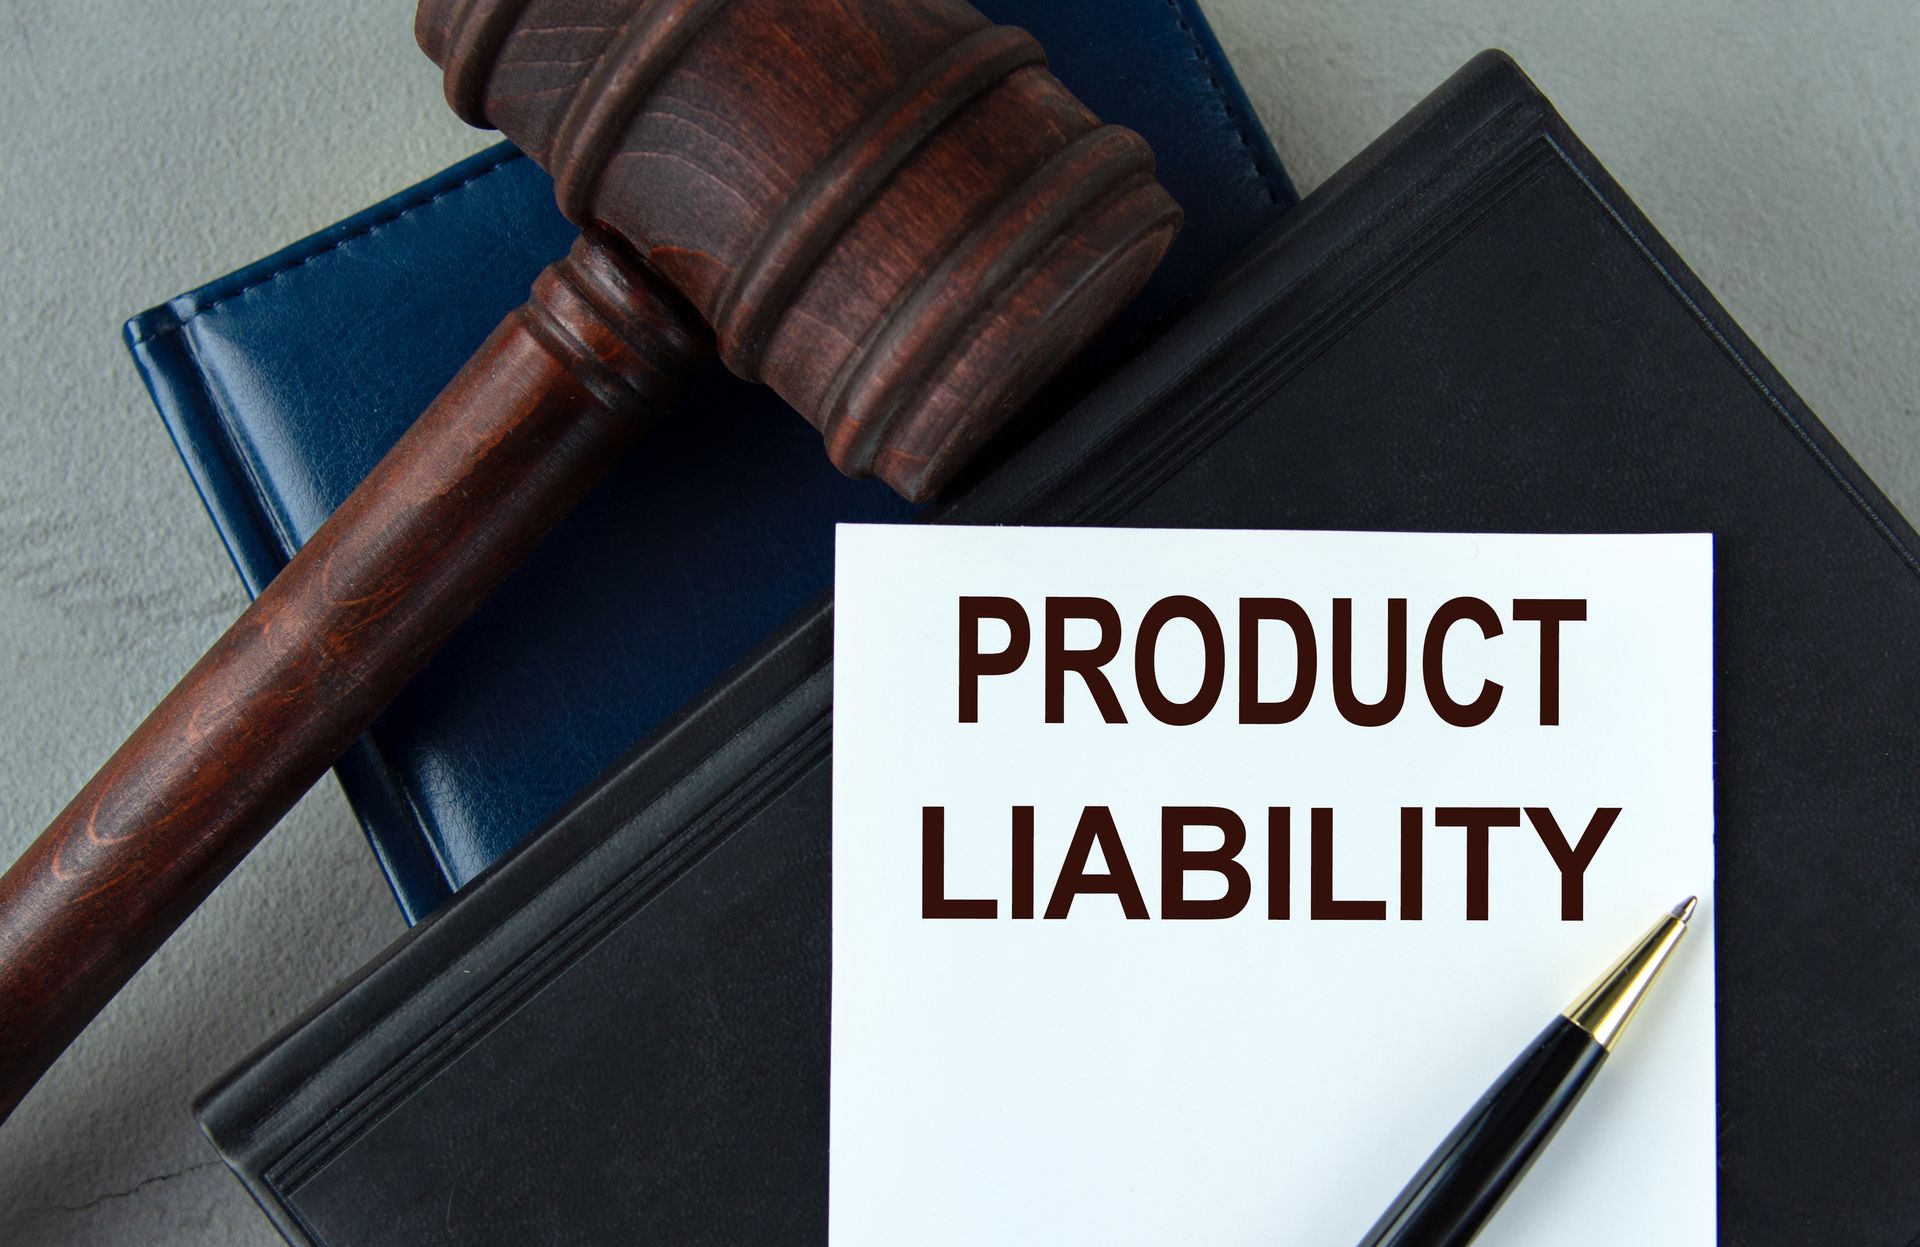 Product Liability on a Paper